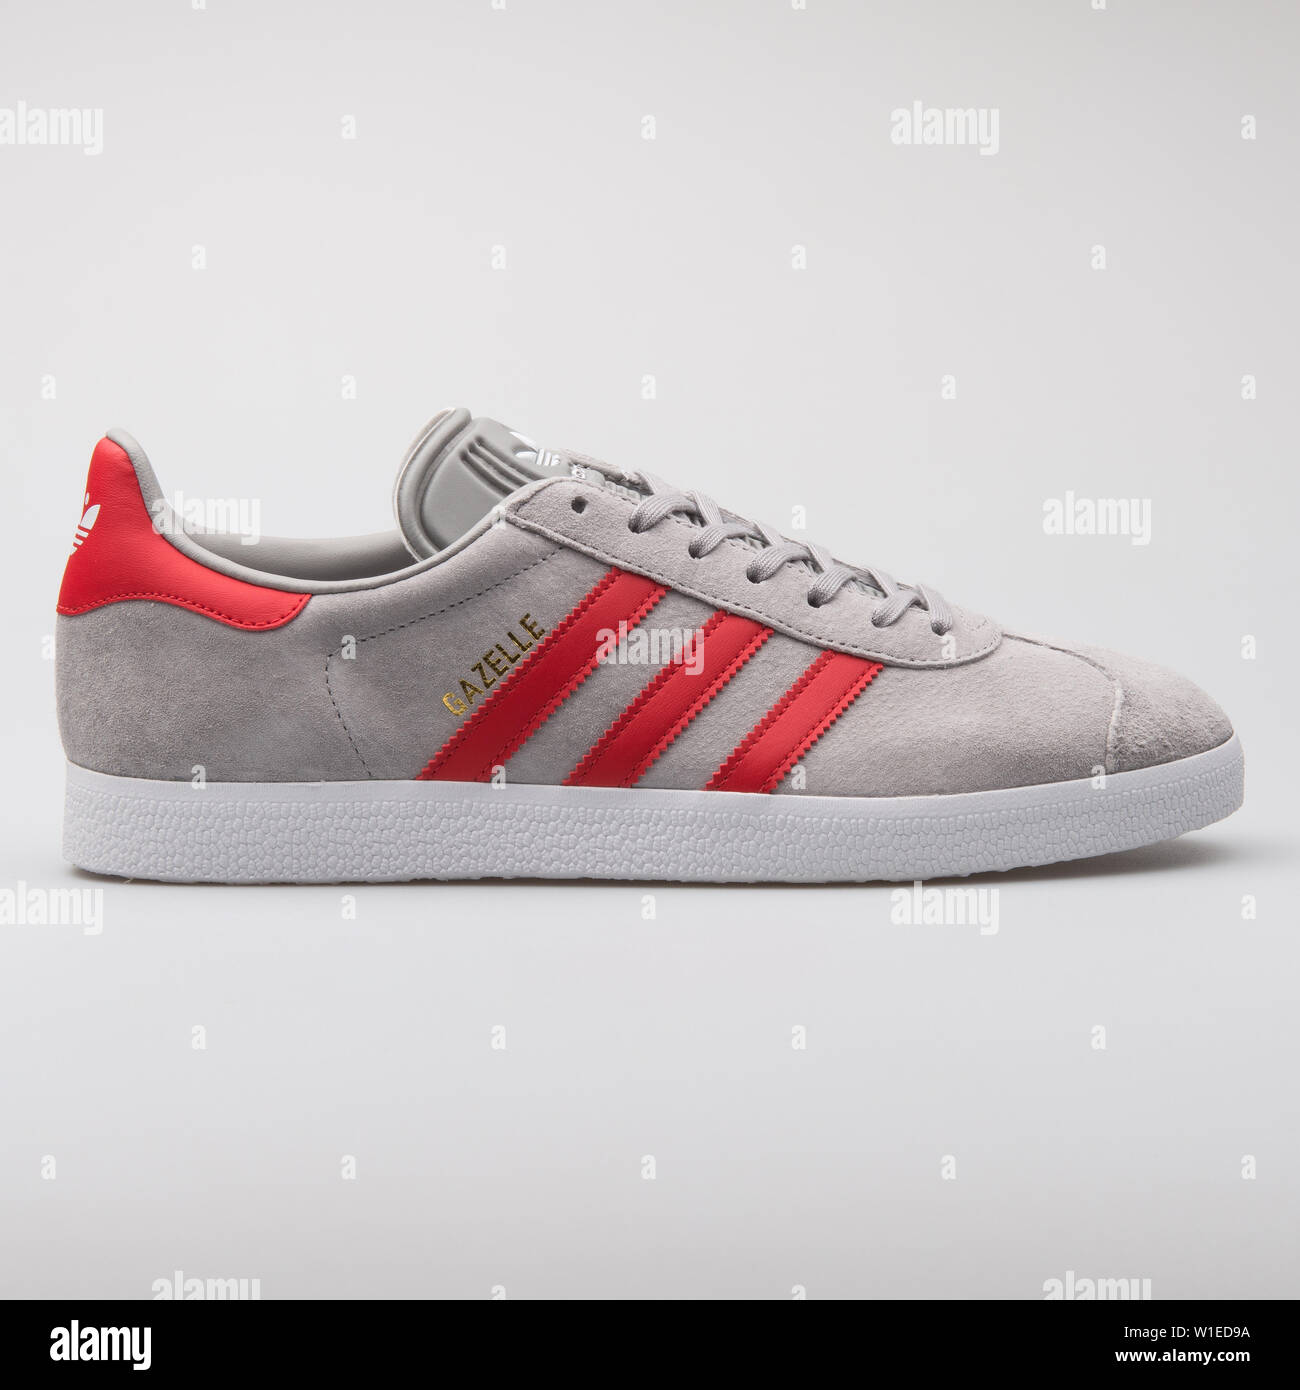 Adidas Gazelle grey and red sneaker on 